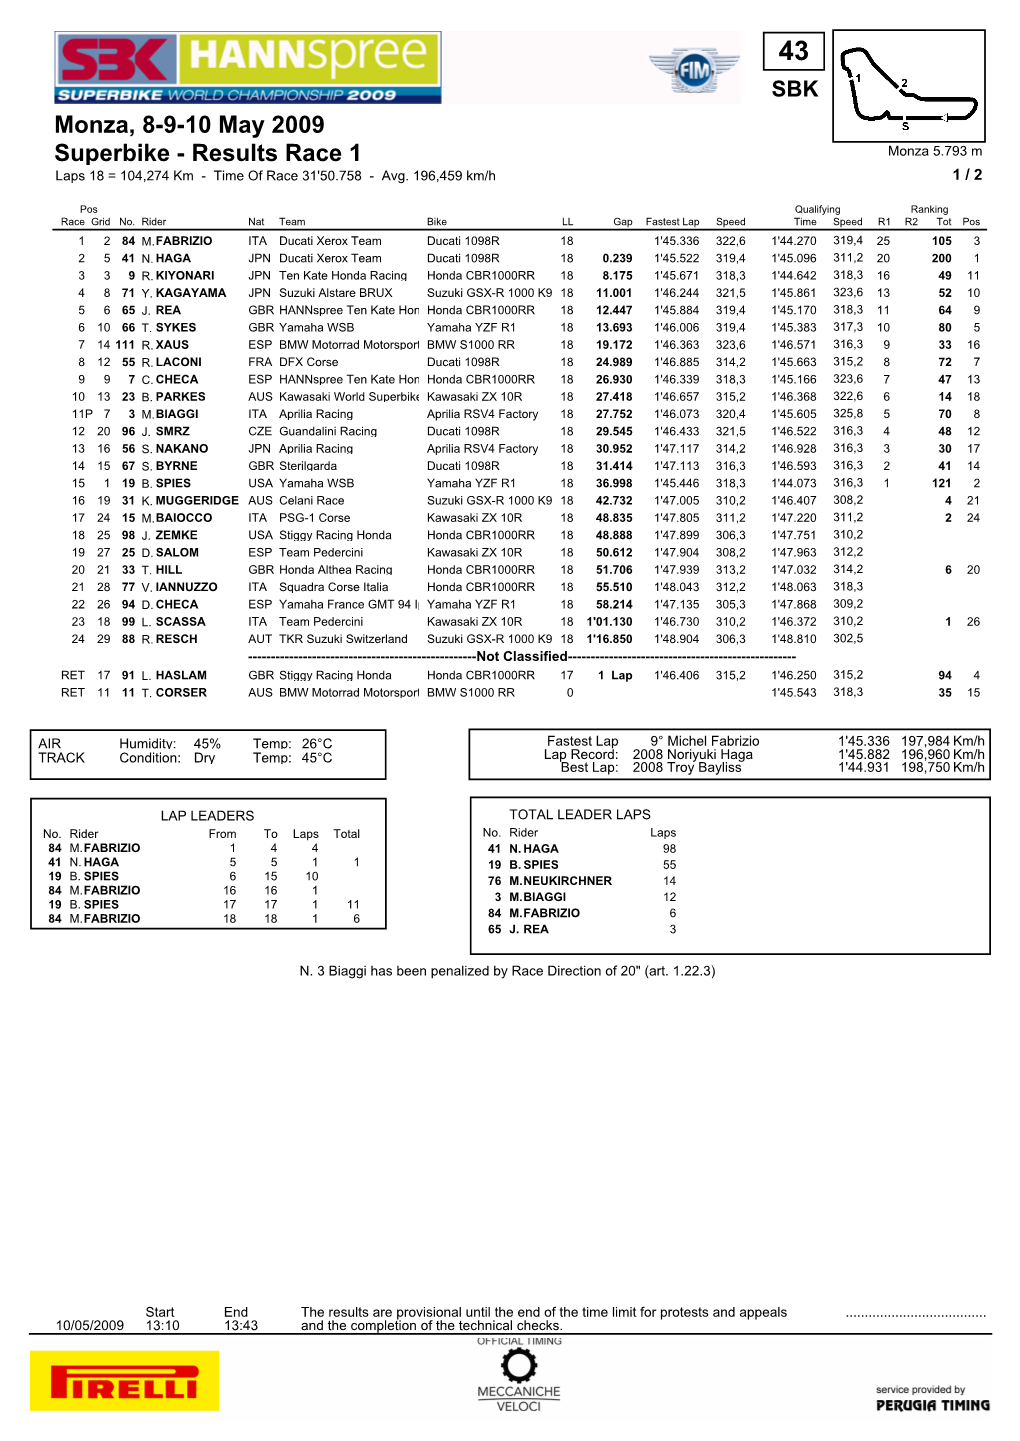 Superbike - Results Race 1 Monza 5.793 M Laps 18 = 104,274 Km - Time of Race 31'50.758 - Avg